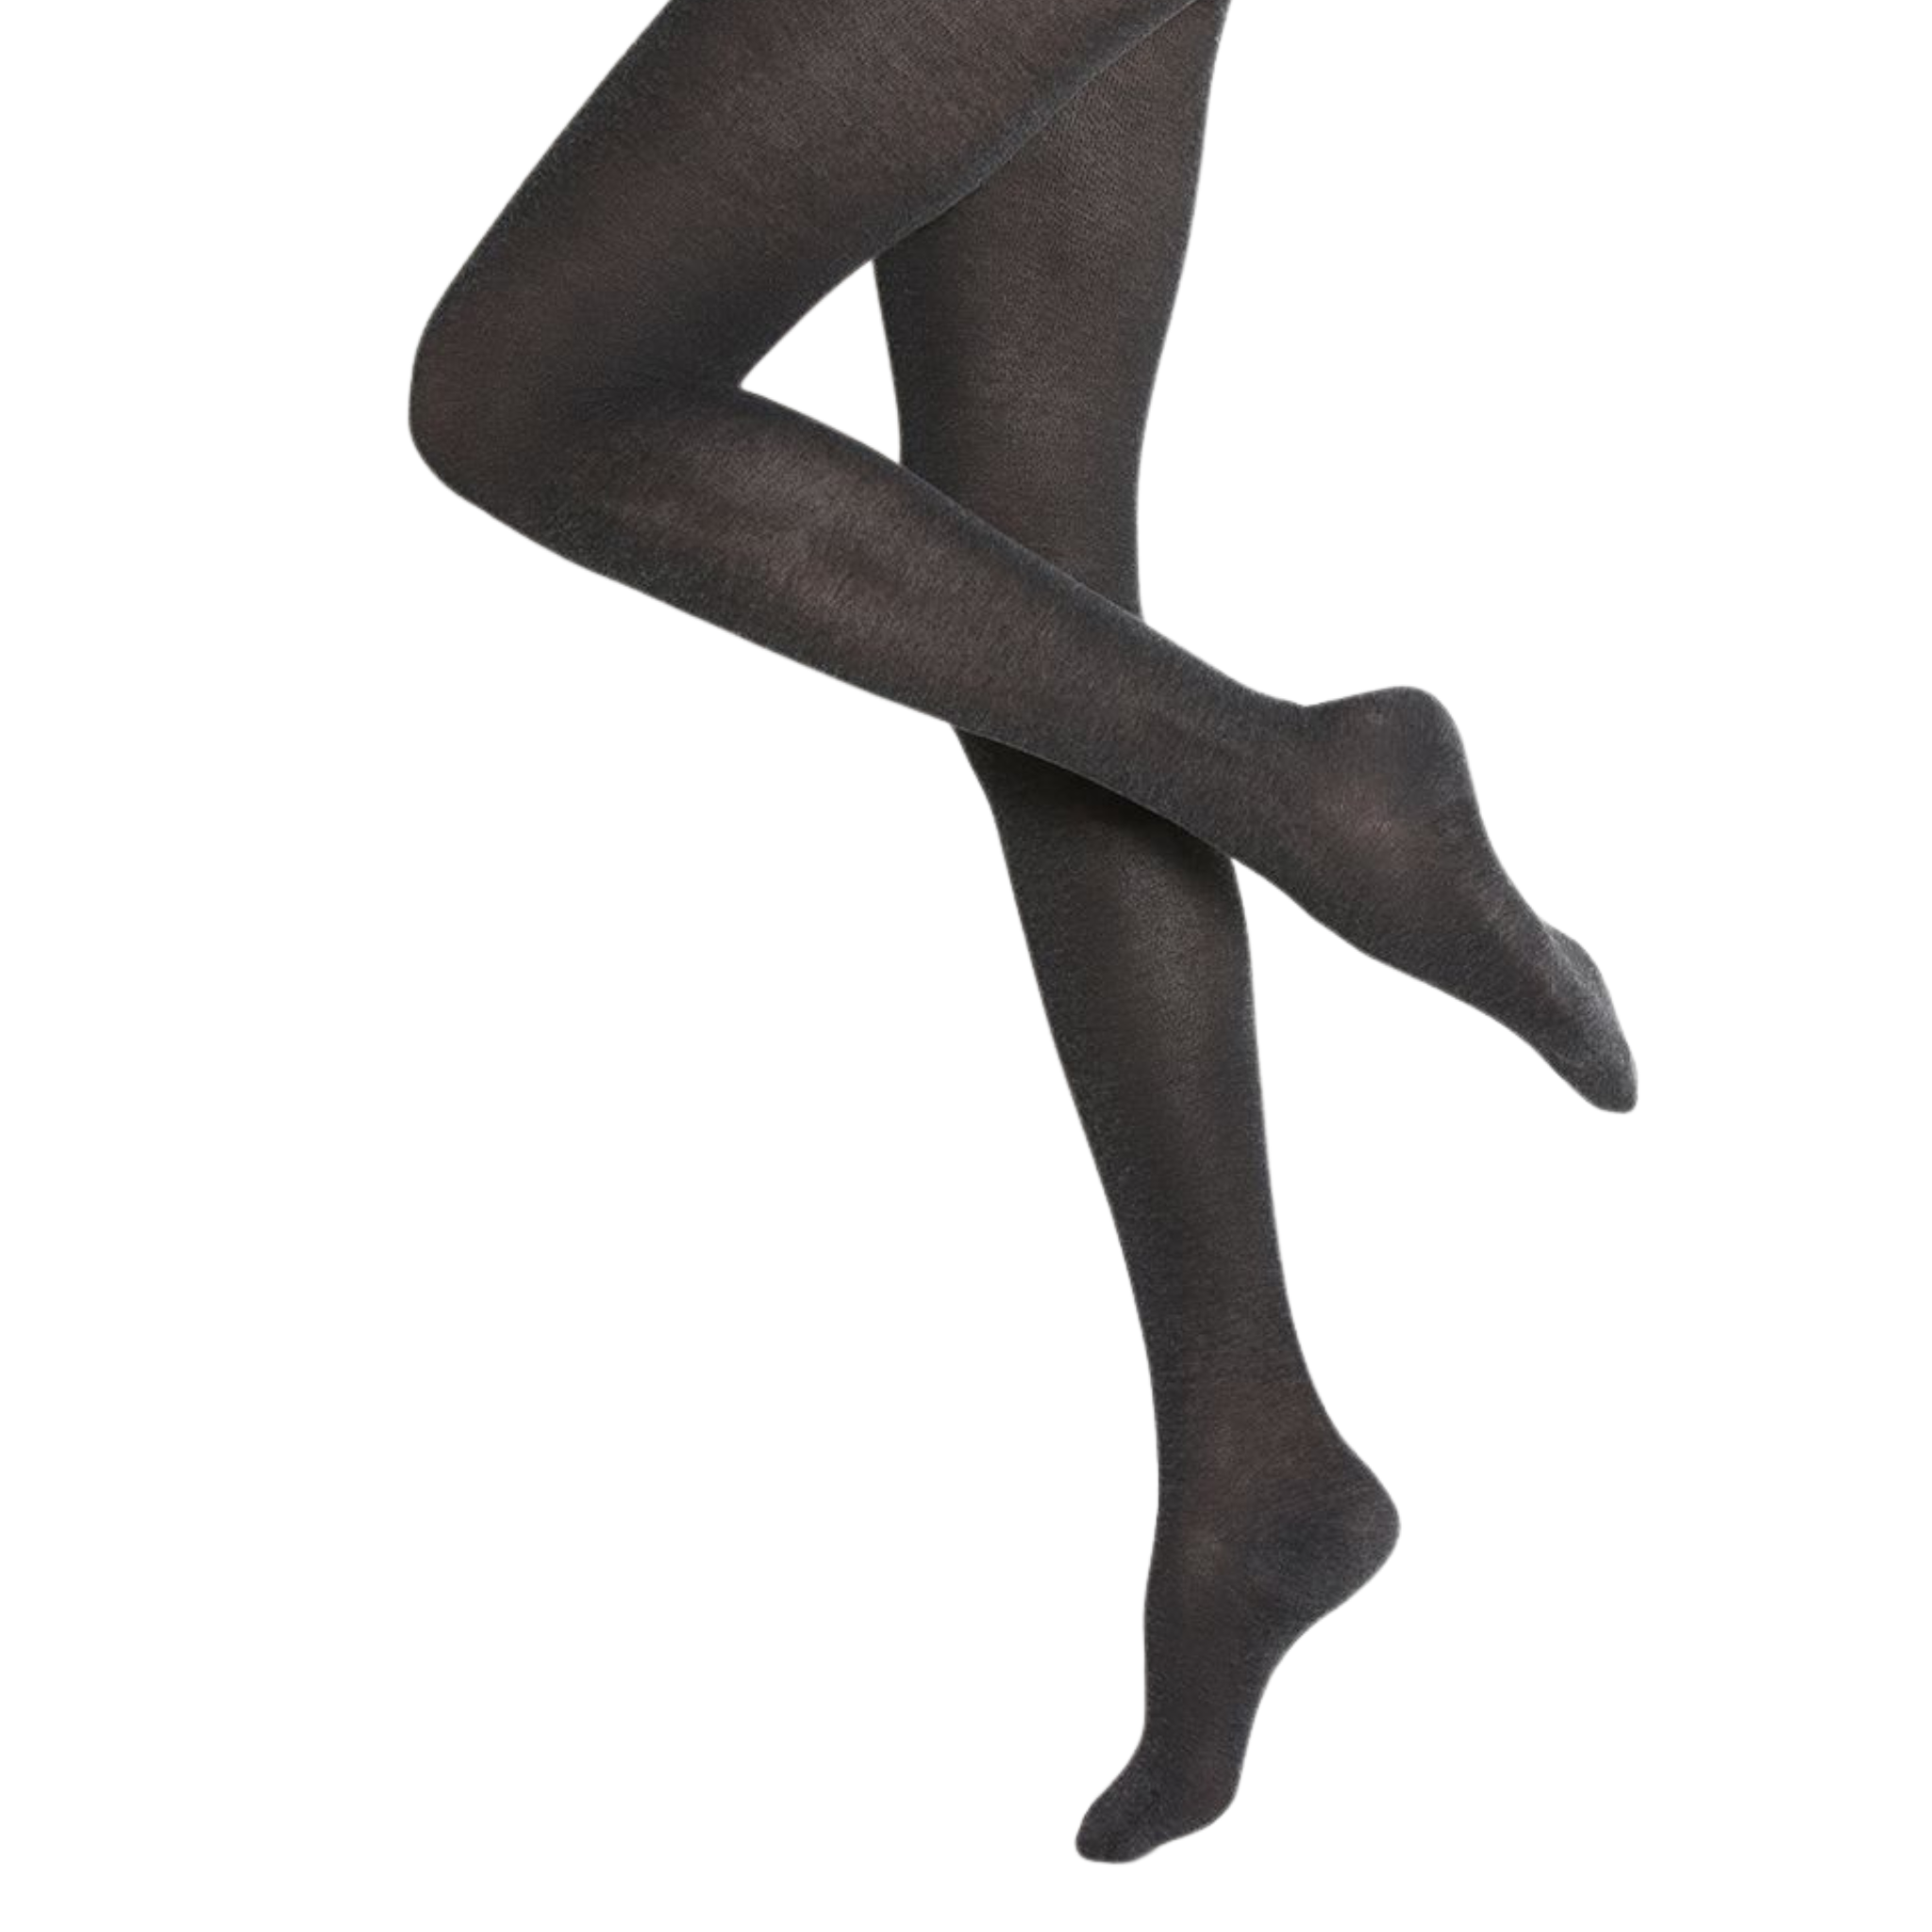 Wholesale Girls Cotton Tights in Charcoal . Flat Style. Great for